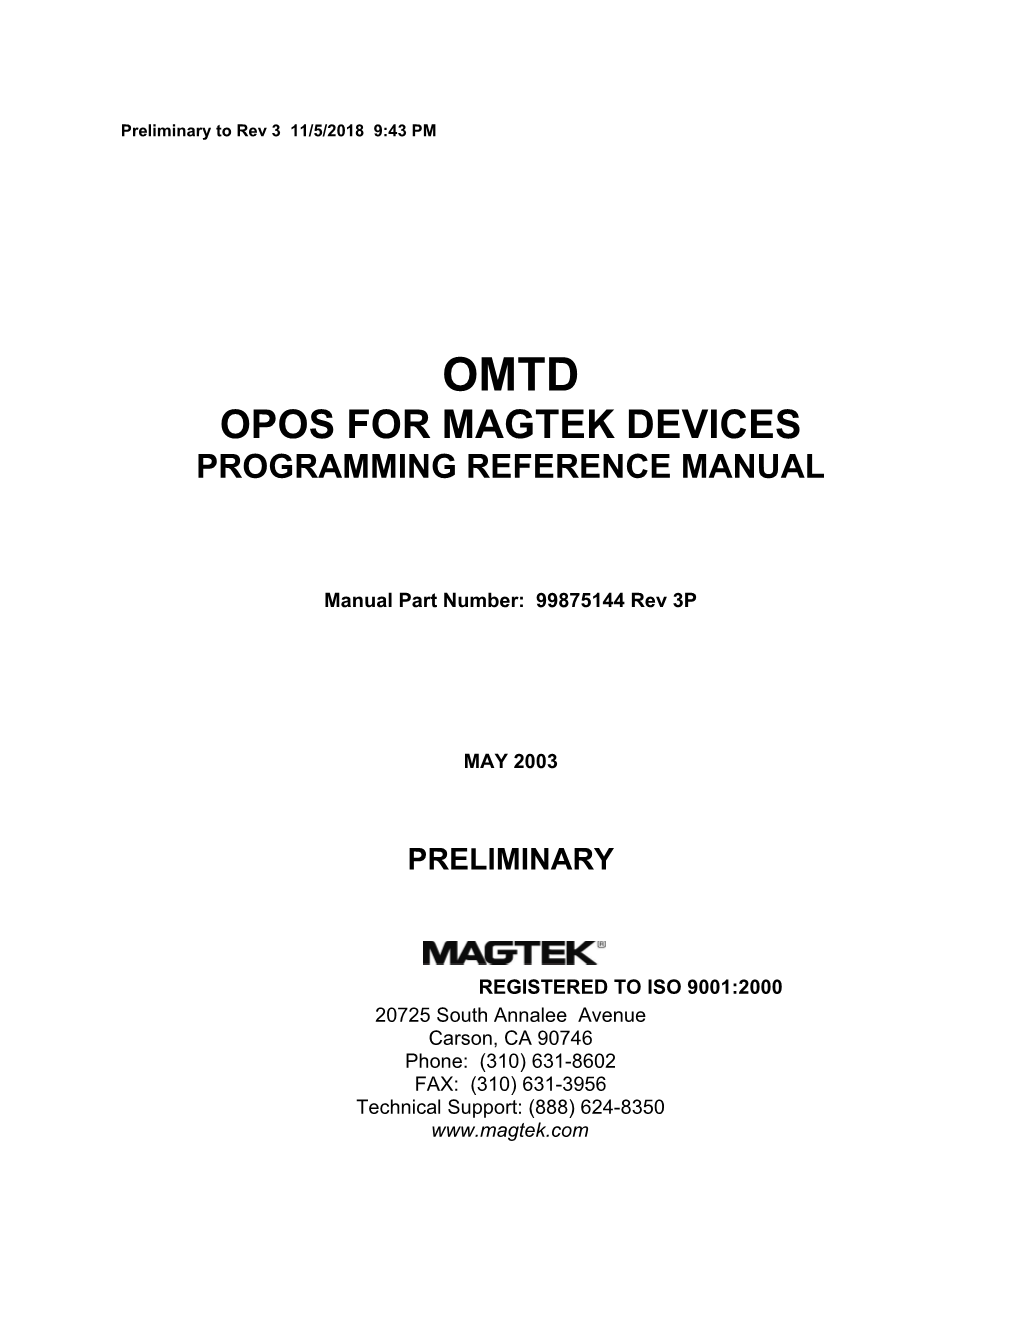 OMTD, OPOS for Magtek Devices, Programming Reference Manual